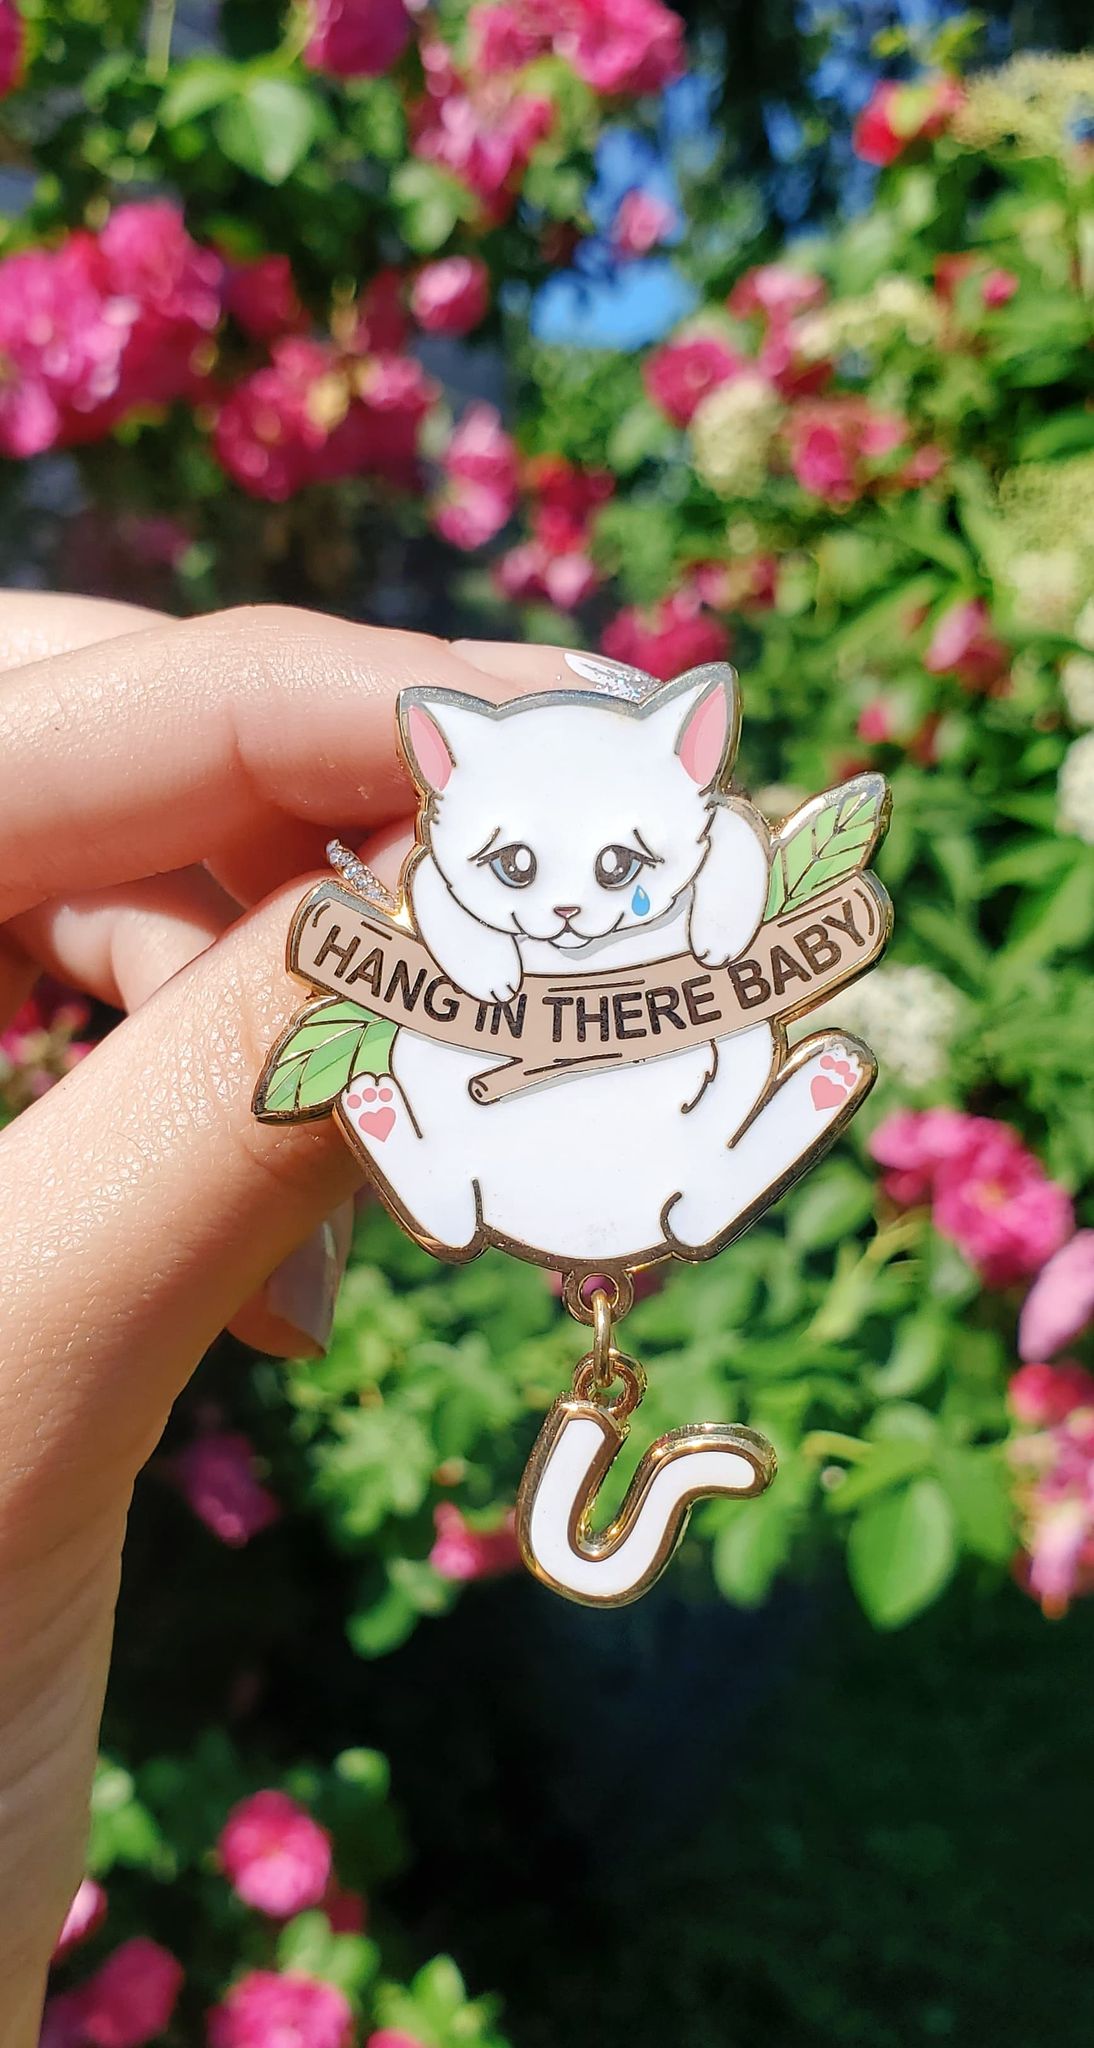 Hang In There Baby! - Hard Enamel Pin